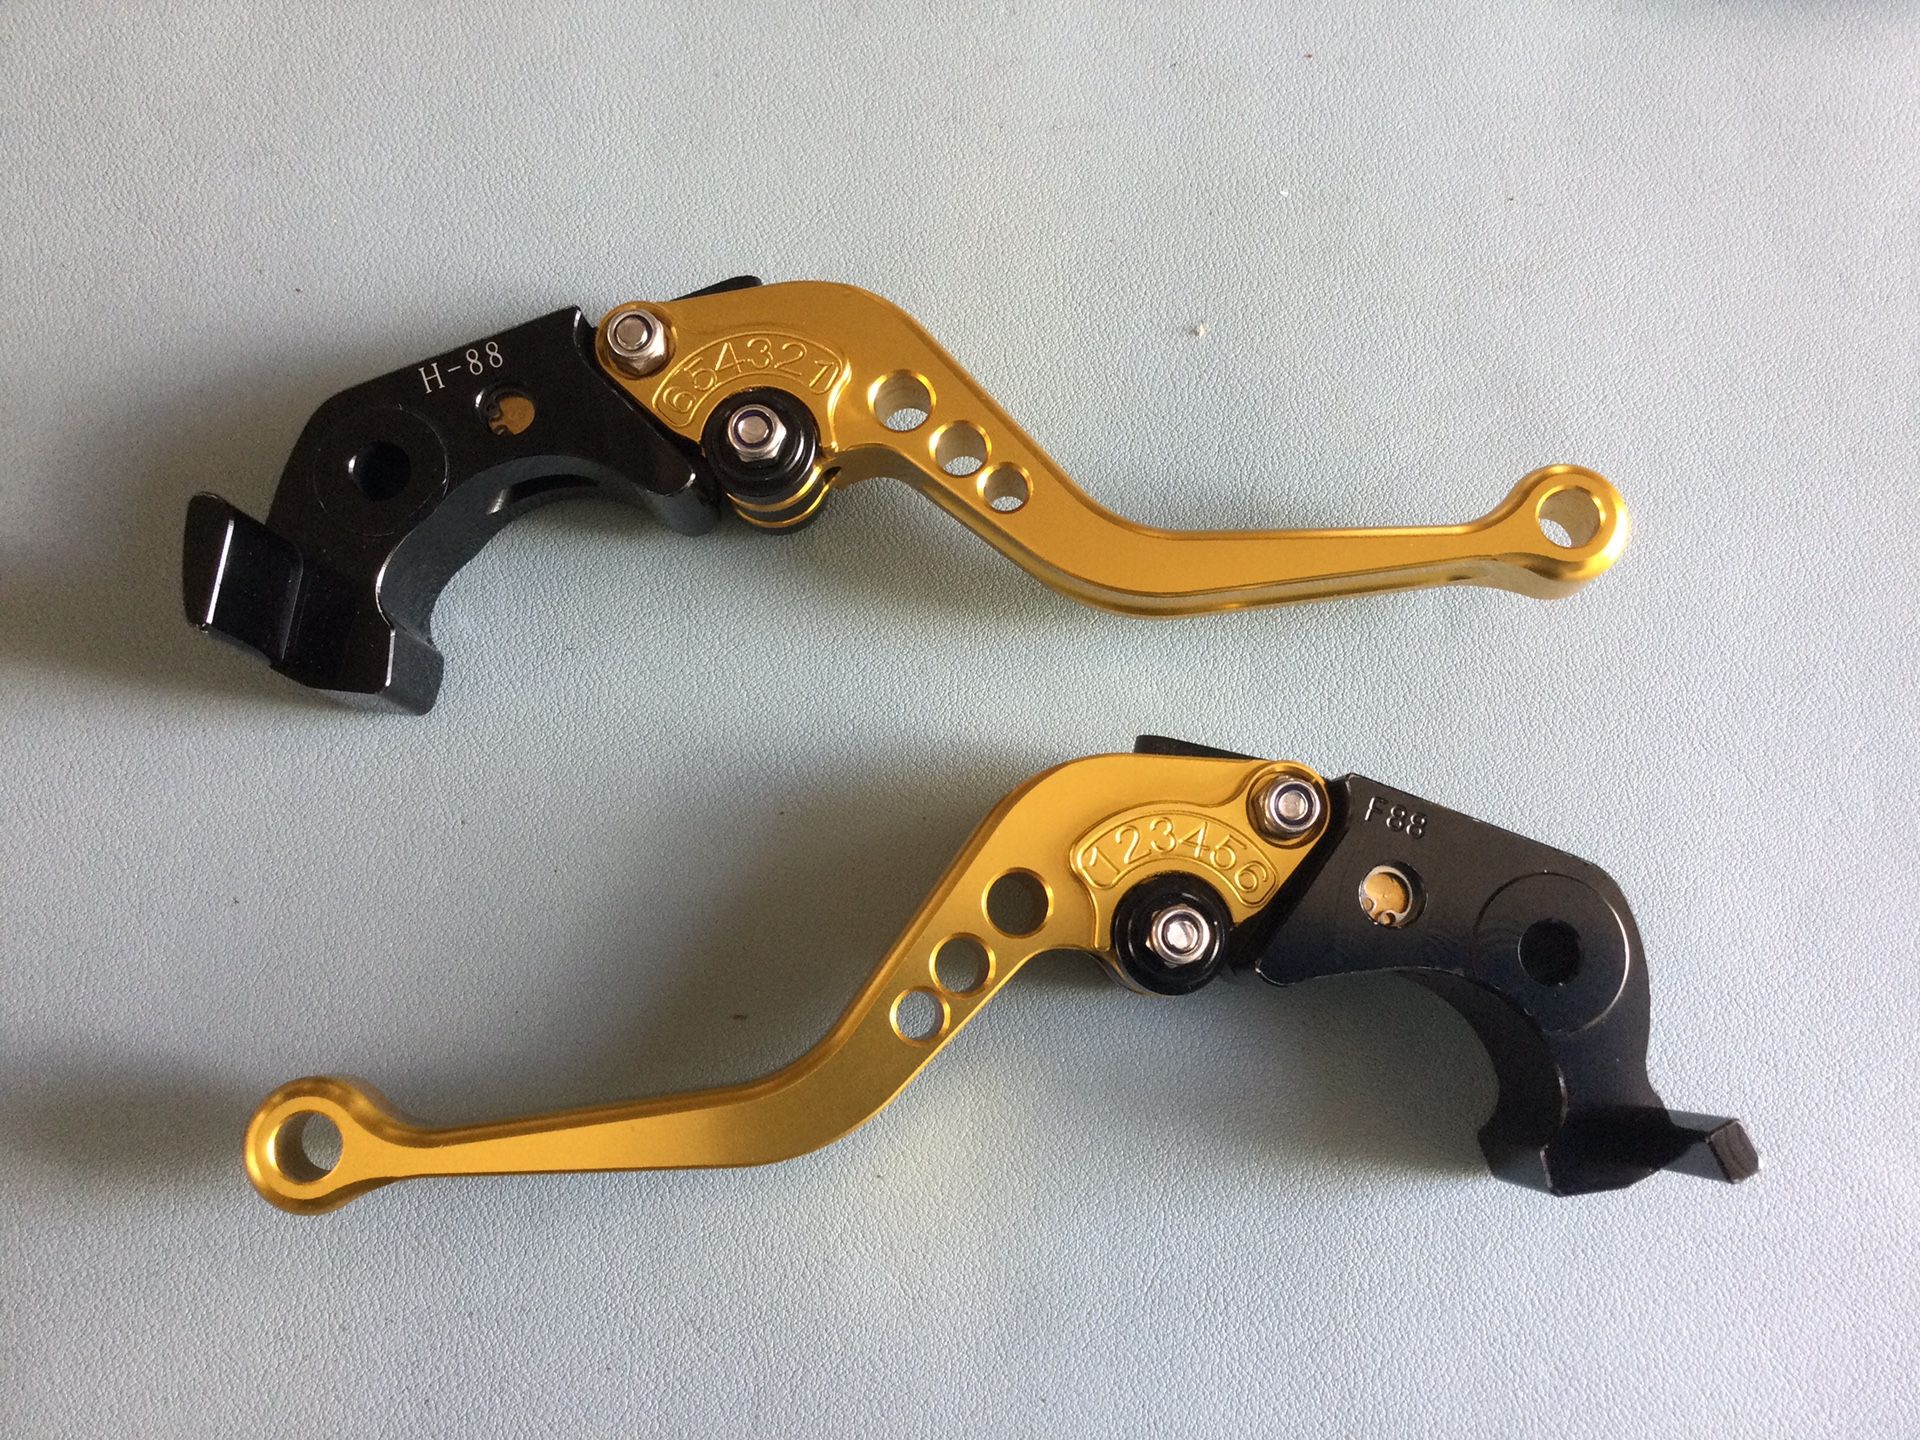 CNC Brake Clutch Levers for Kawasaki ZZR/ZX1400 SE Version 2016, 17, 18, 19, 20 Lever. (Gold) $25.00 pick Up South Gate